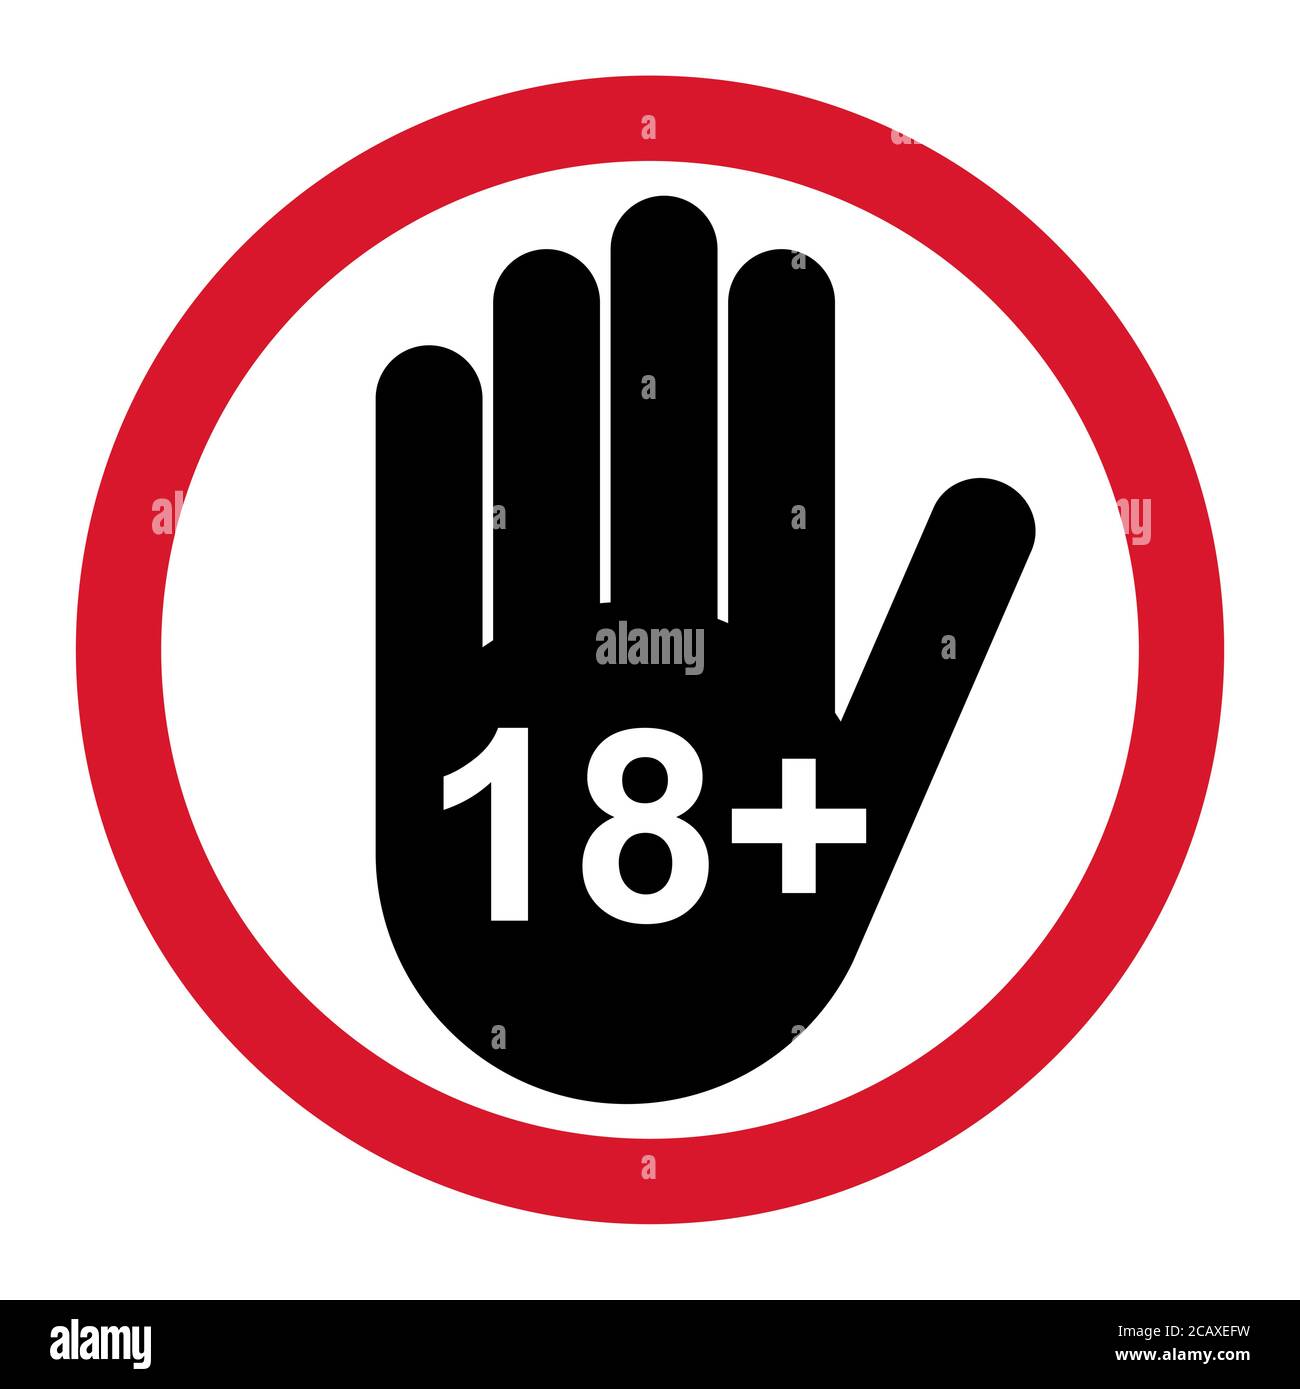 18+ restriction flat sign with hand isolated on white background. Age limit symbol. No under eighteen years warning illustration . Stock Vector